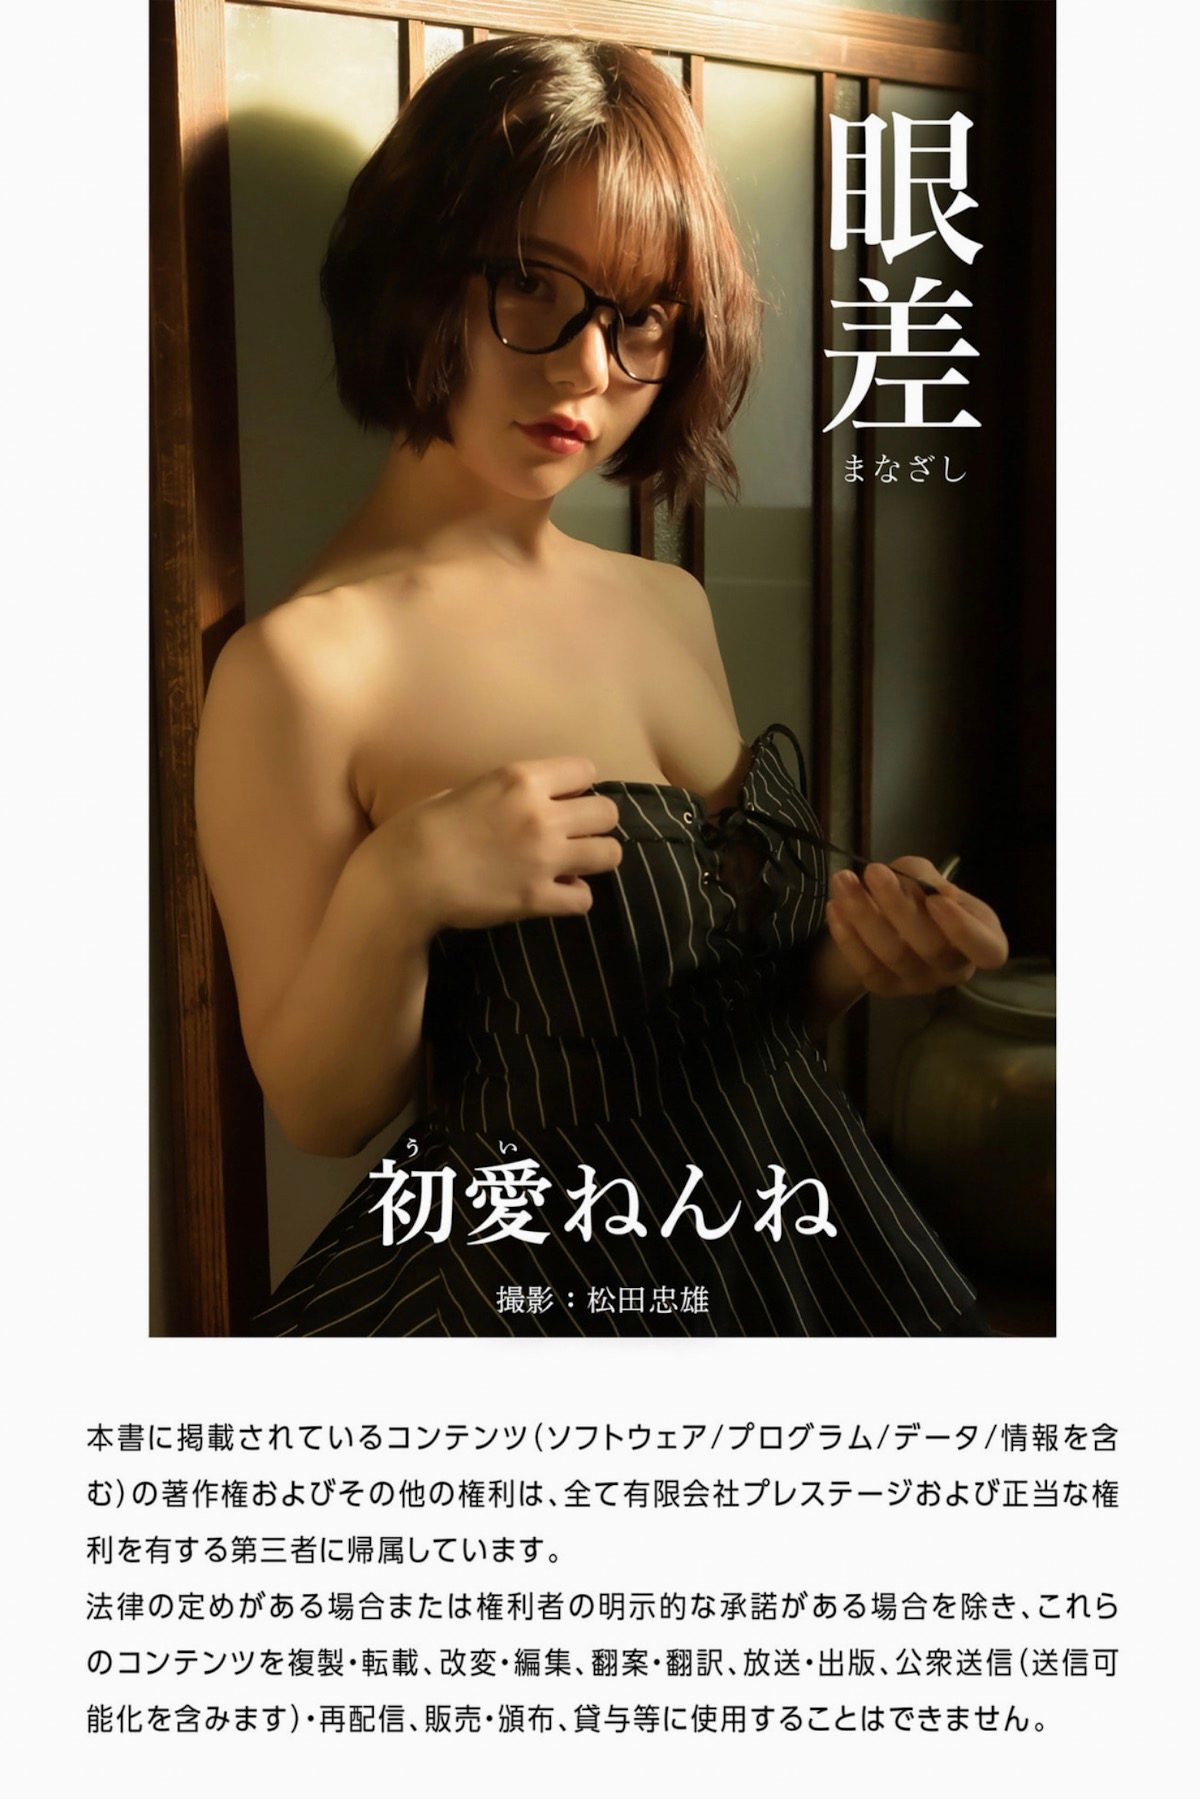 Gravure Photo Book Nenne 初愛ねんね Eye Difference 0067 6343162048.jpg